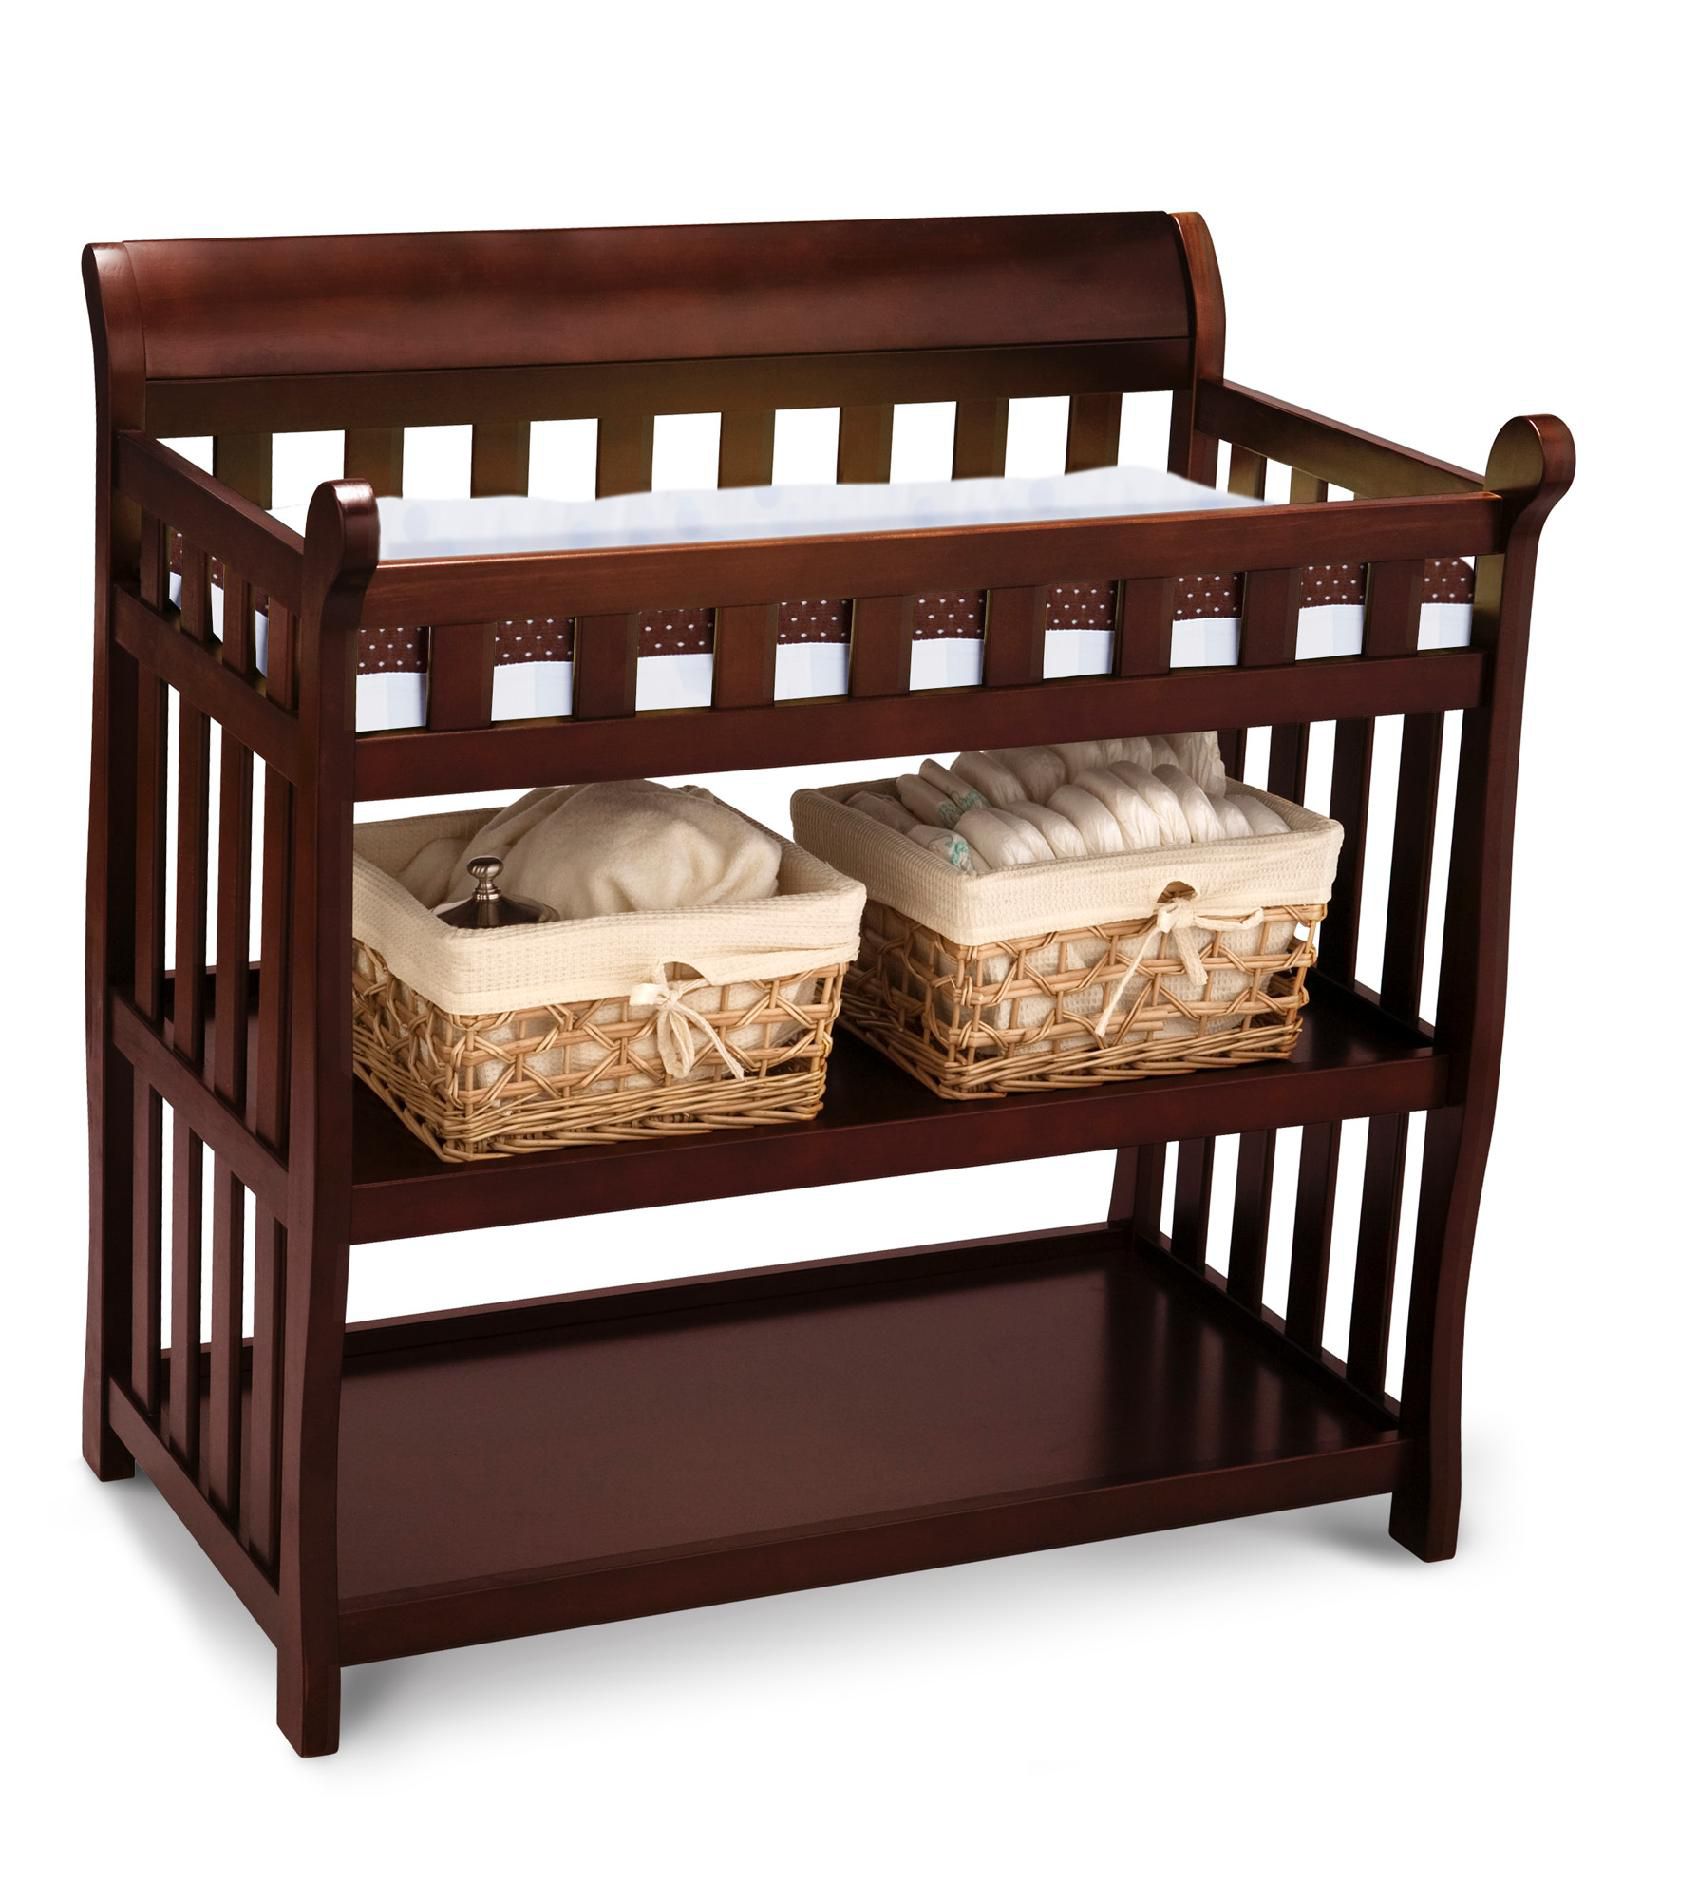 black baby changing table